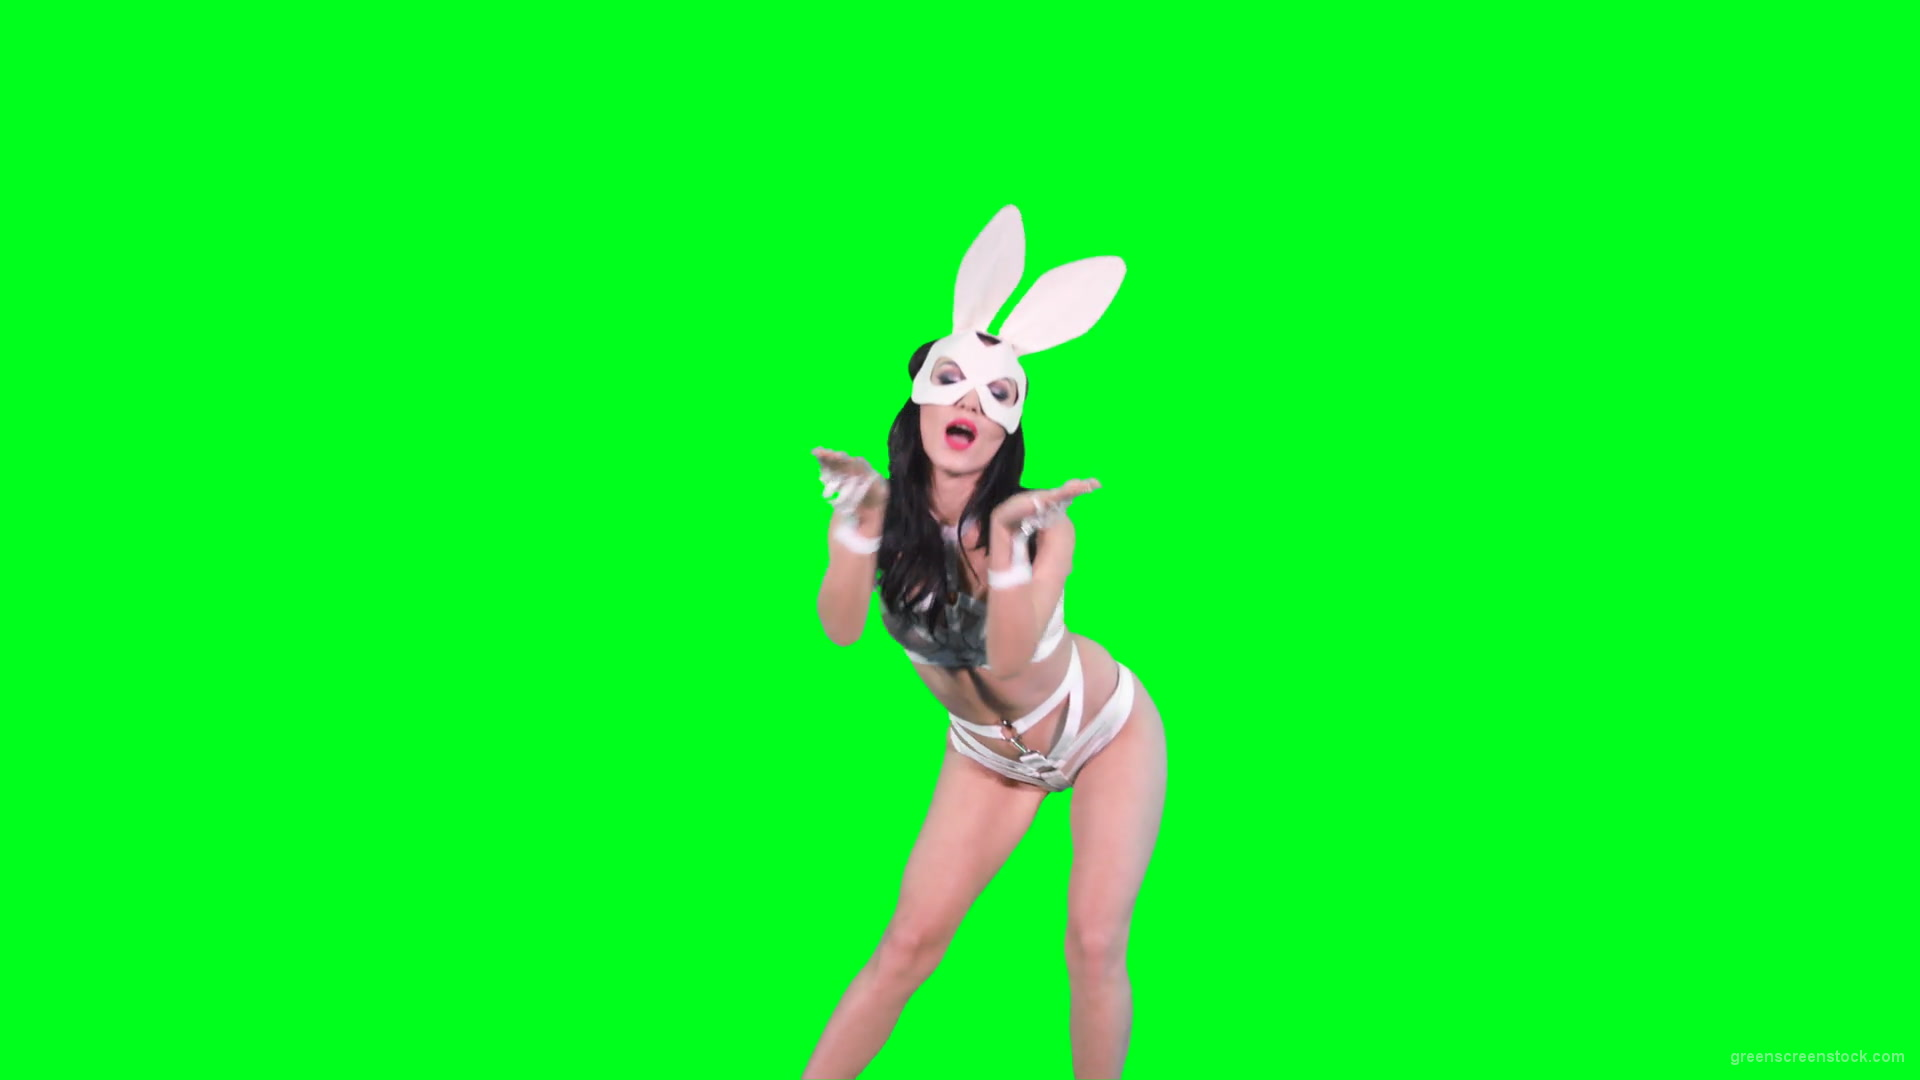 Girl-in-rabbit-bunny-mask-posing-and-show-gestures-on-green-screen-4K-Video-Footage-1920_007 Green Screen Stock